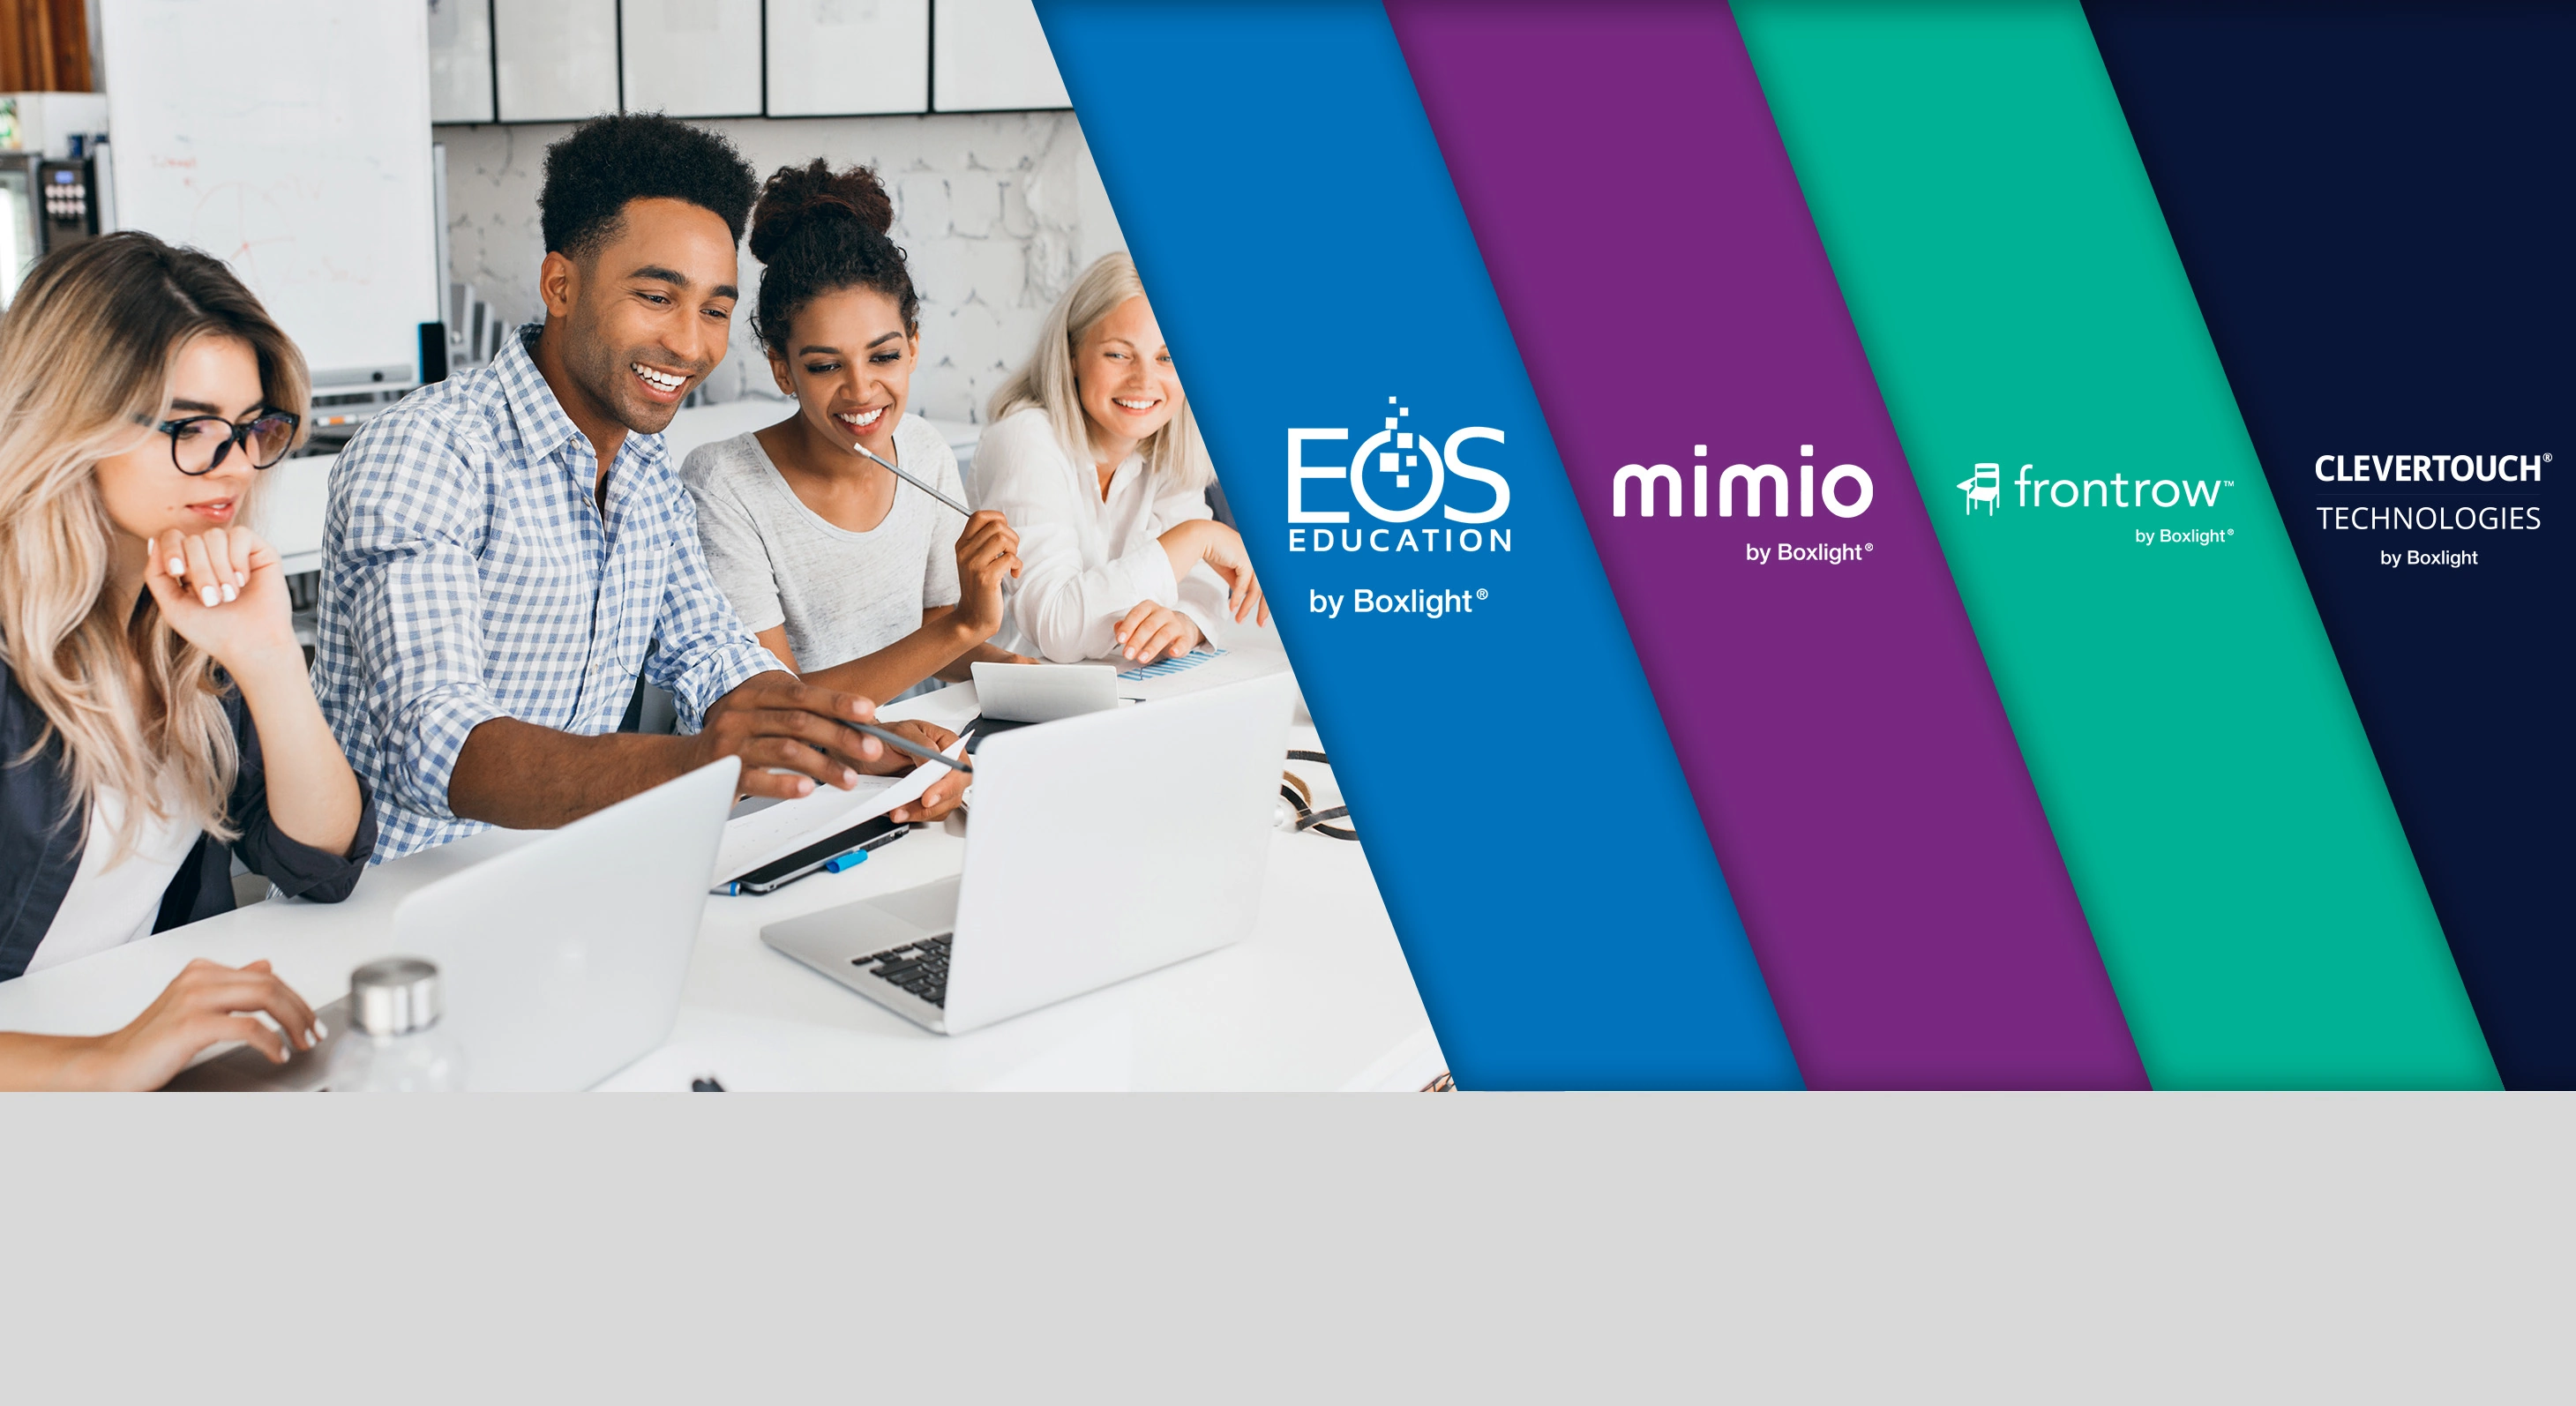 smiling people in a meeting with the ESO, Mimio, FrontRow and Clevertouch logos and colours in stripes down the right-hand side